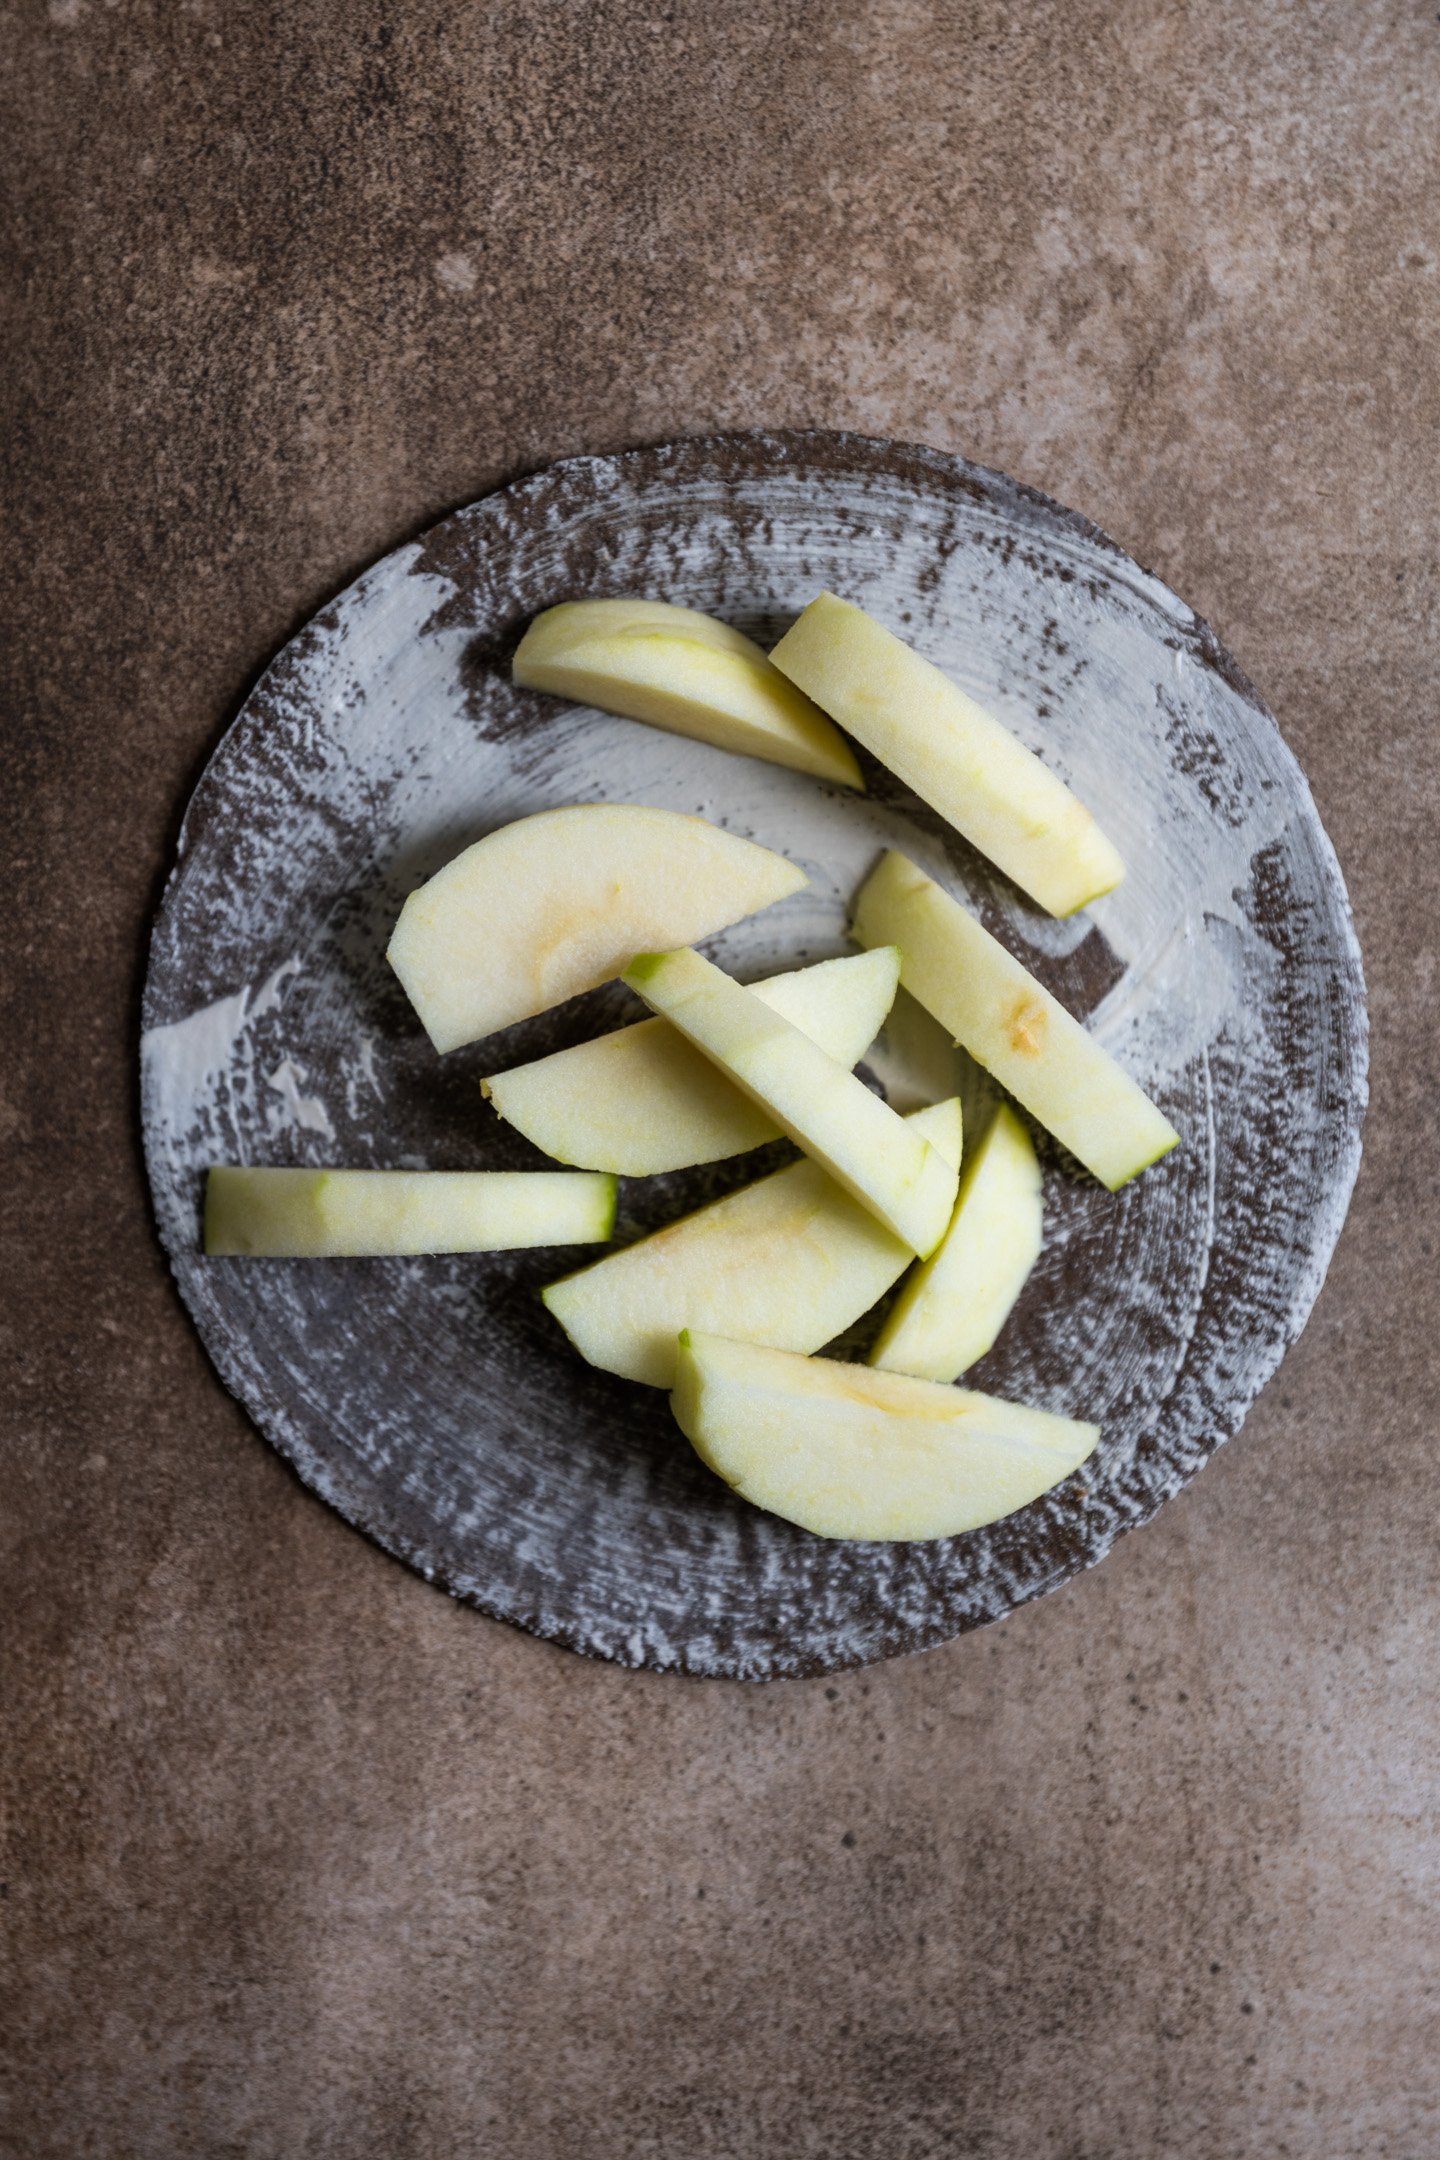 Slices of apples on a brown and white plate.